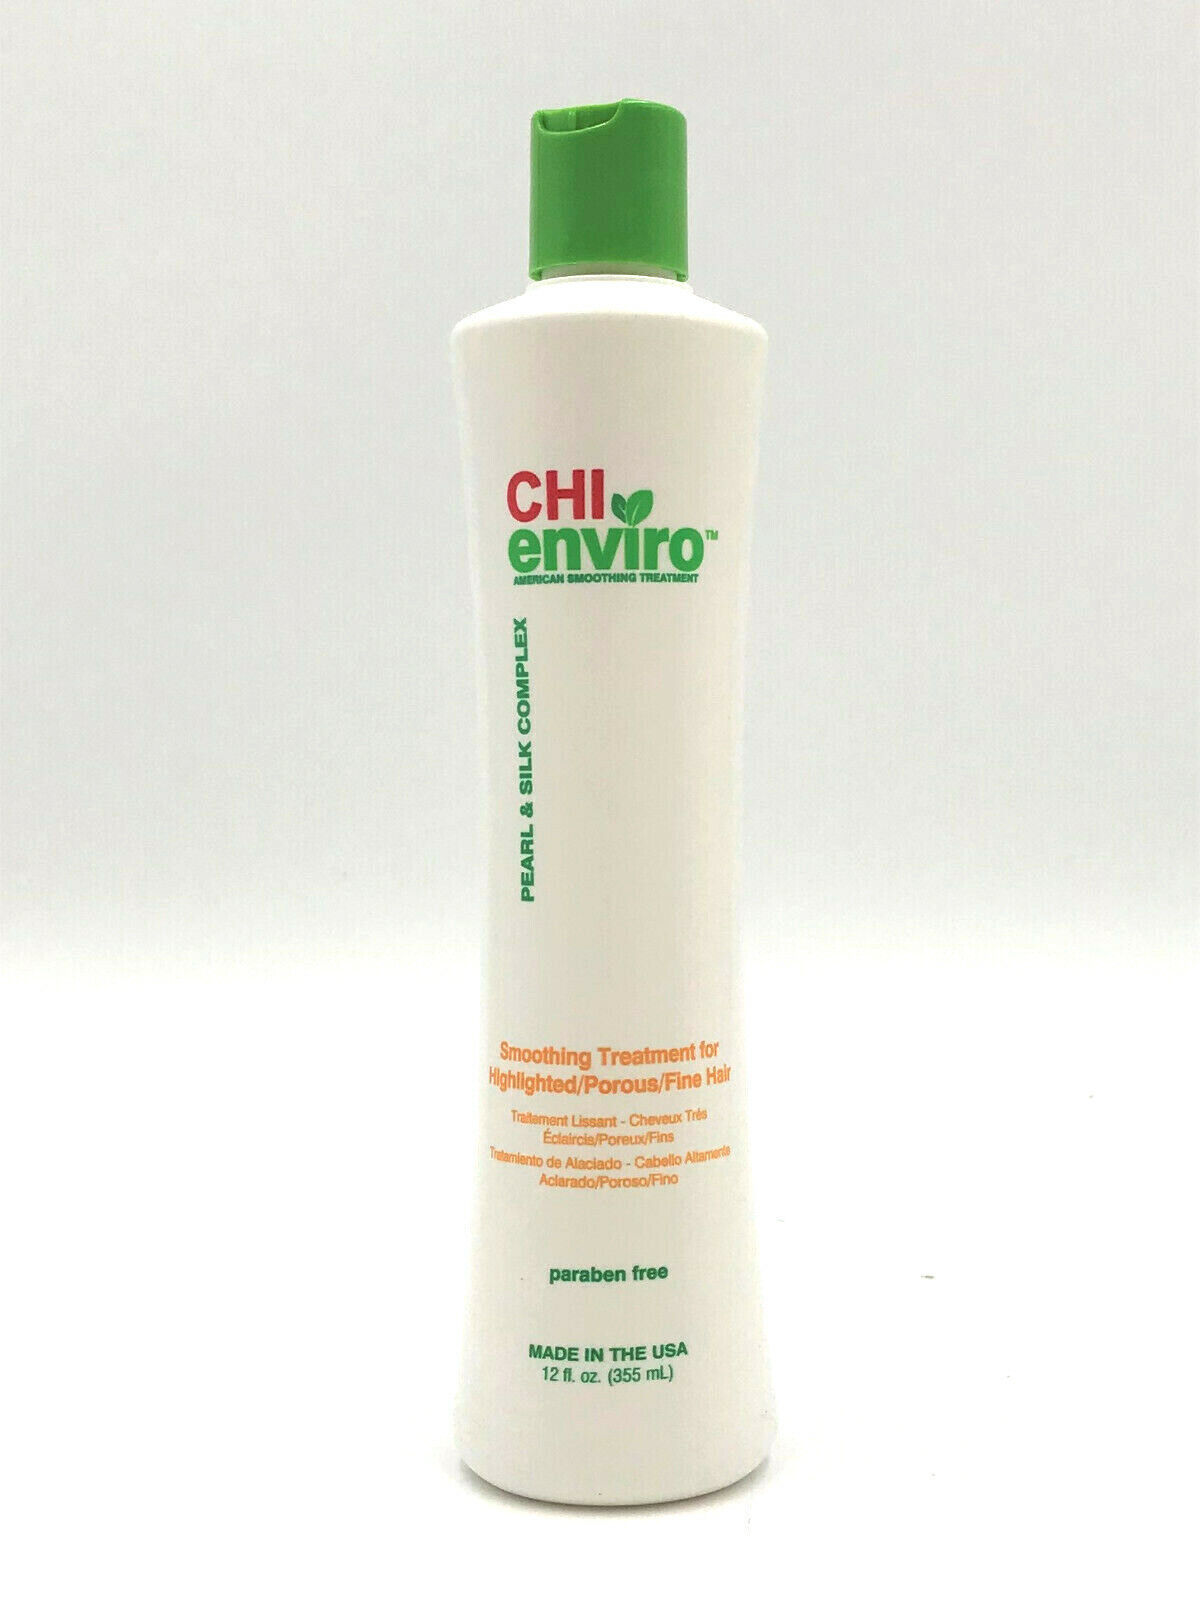 CHI Enviro Smoothing Treatment For Highlighted/Porous/Fine Hair 12 oz - $119.95